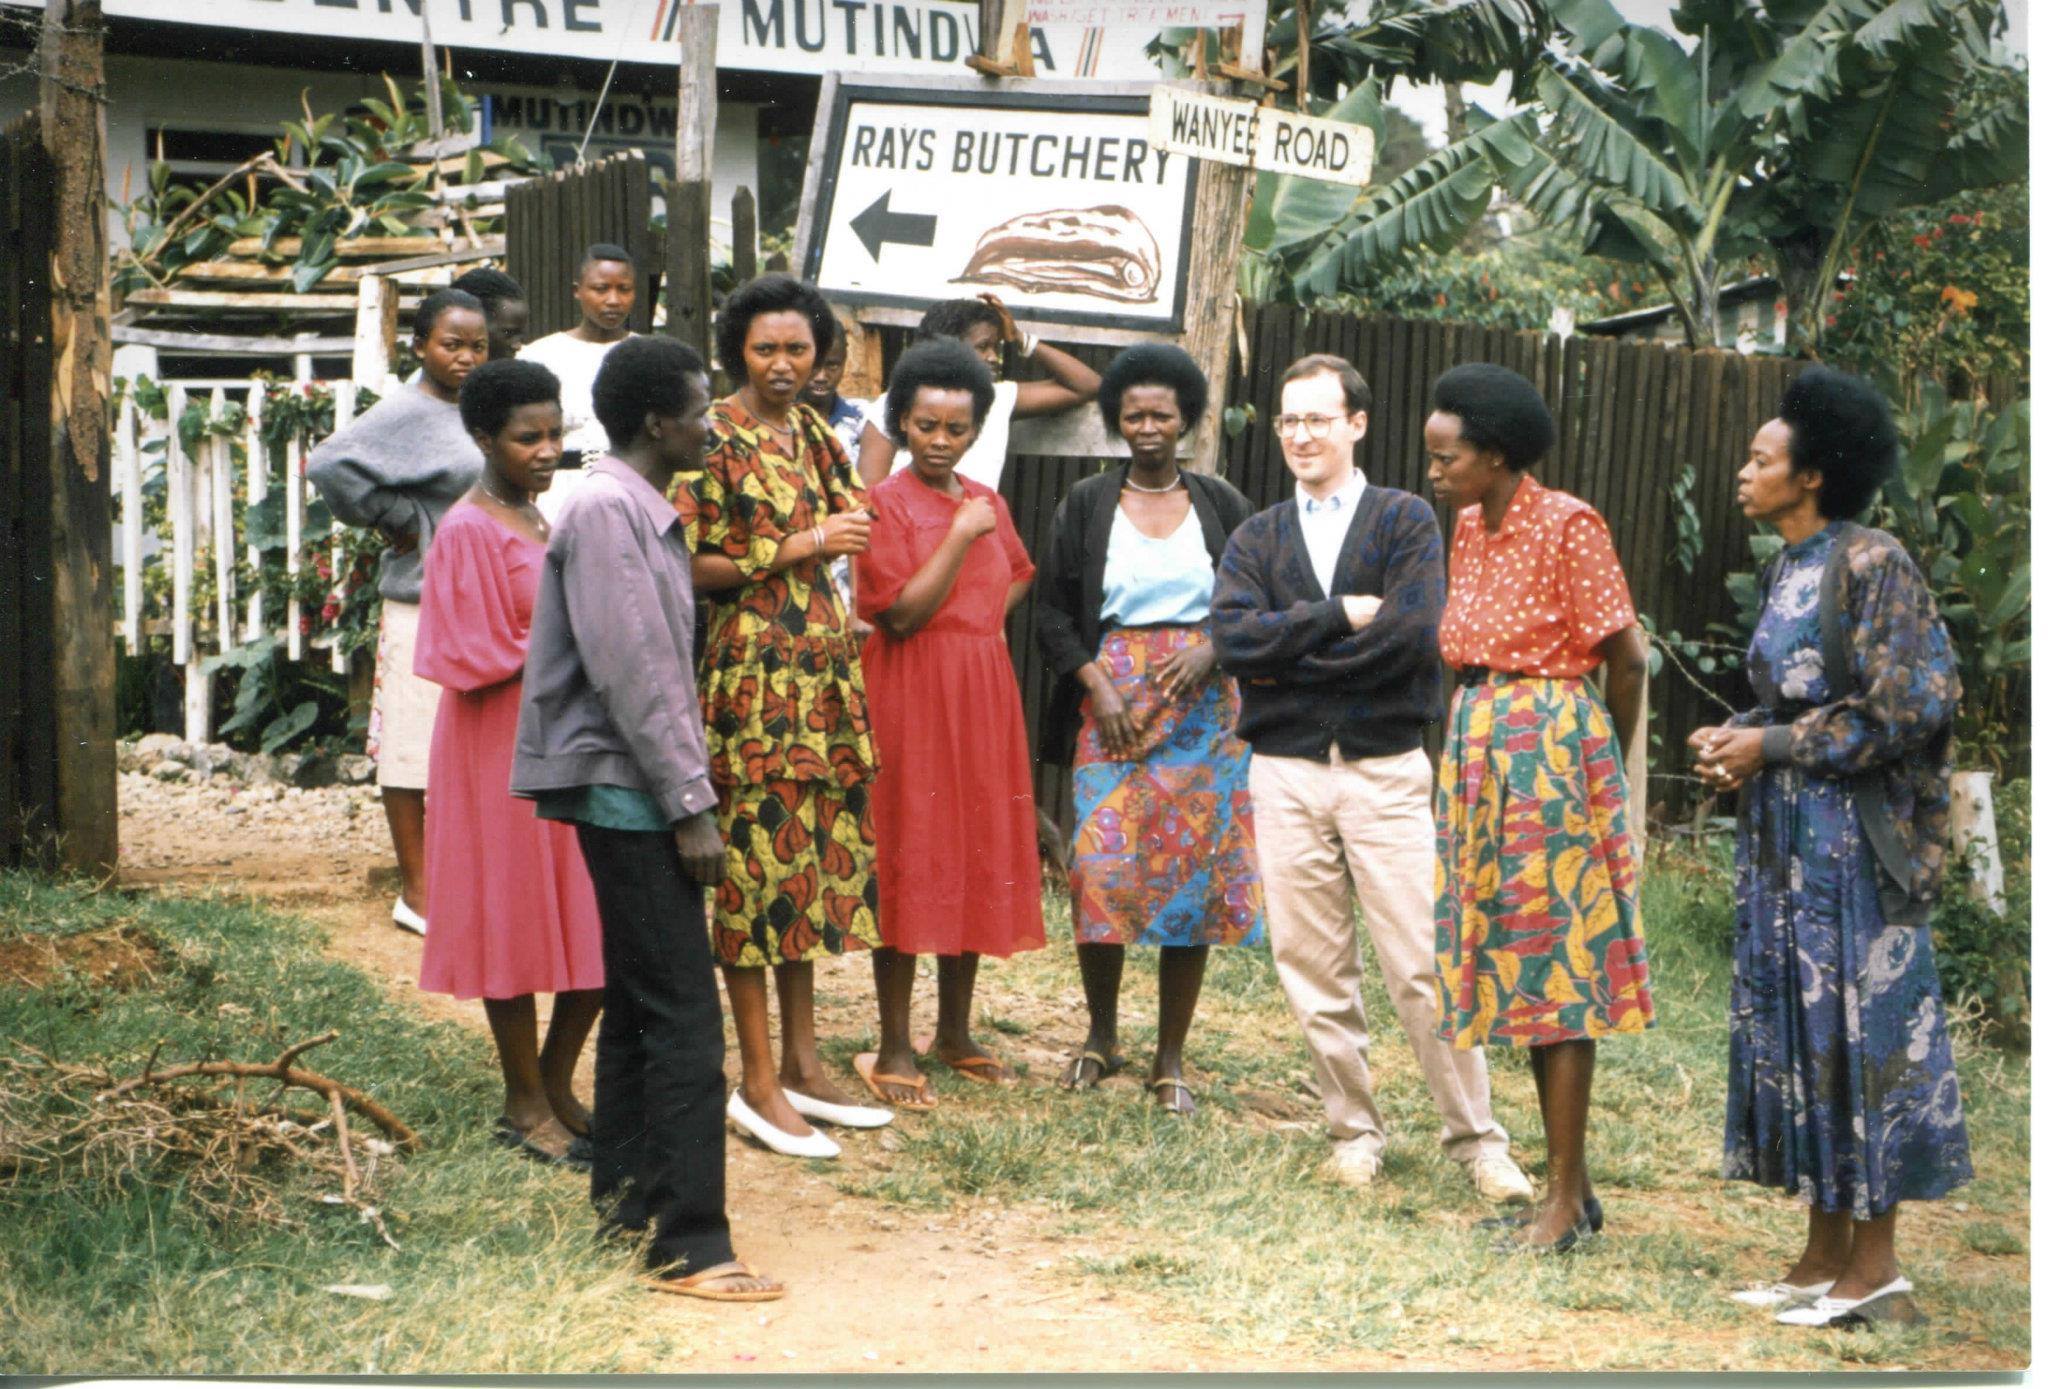 This is a marvelous group of Rwandese women, led by Gaudiosa Ruzage (second from right). Gauddy, with a small grant from JRS, started the "Splendid Tailoring Shop" in a slum called Riruta in Nairobi. 